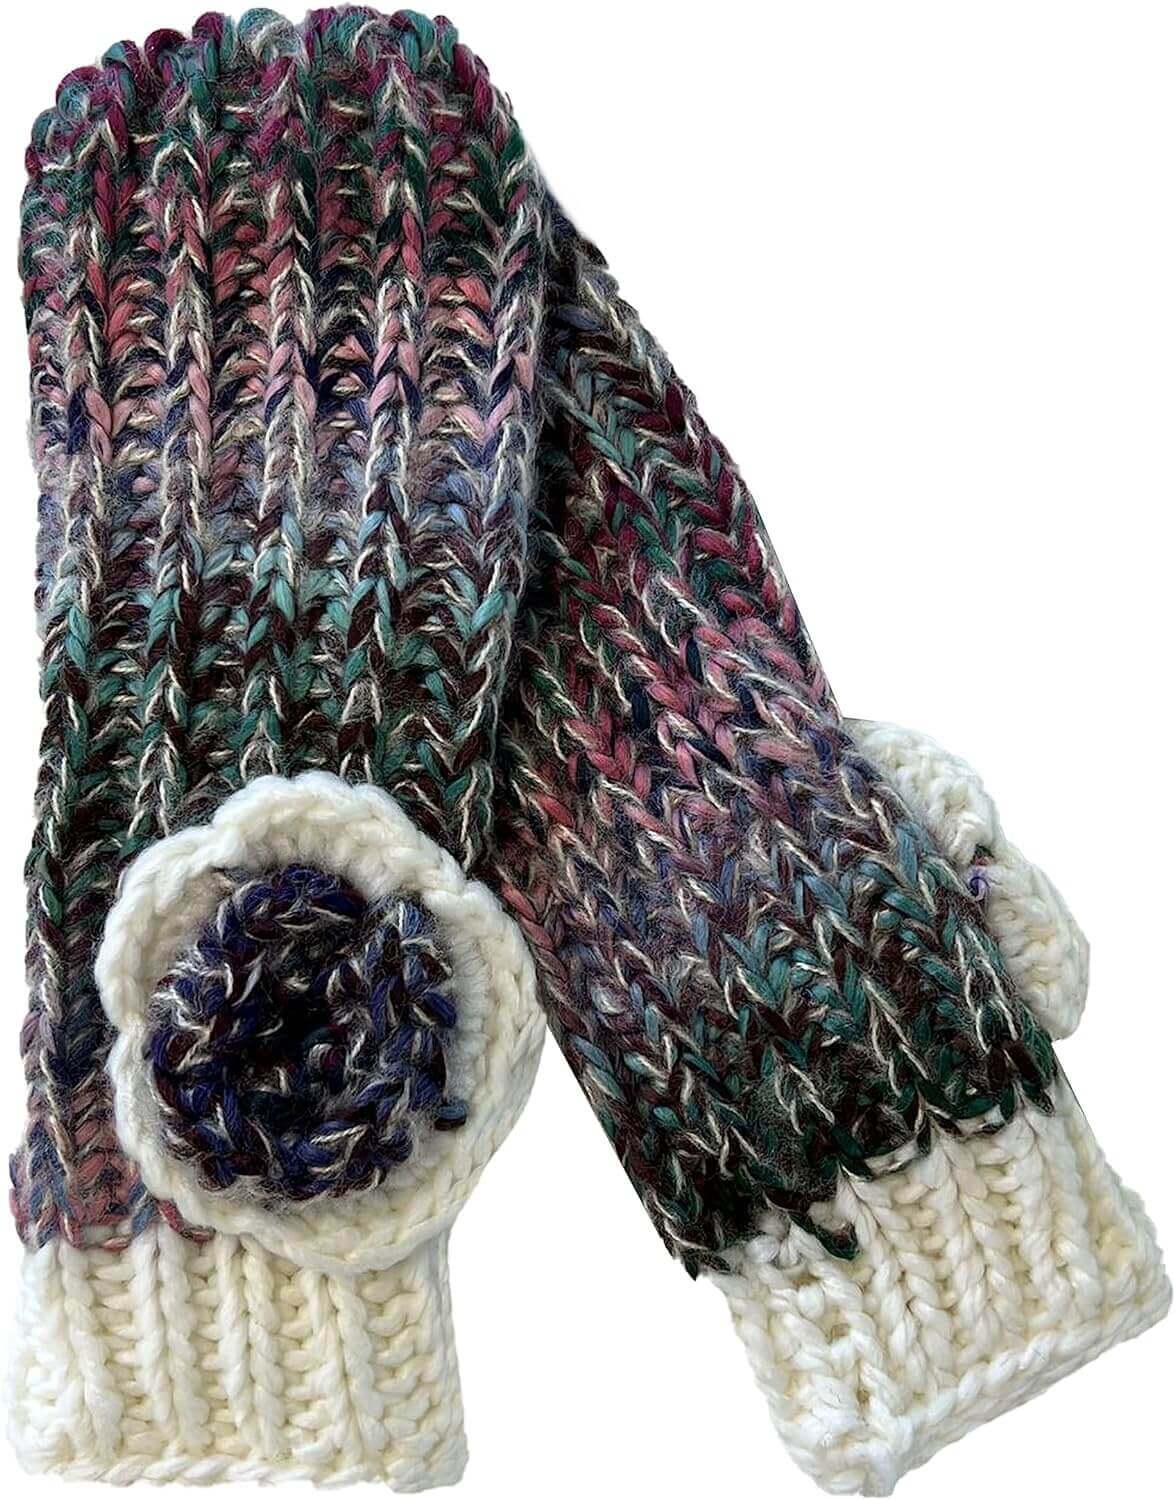 Women Nina Knitted Headband Hand Warmer Winter Ski Cozy And Soft. Buy now for £7.00. A Hats by Sock Stack. accessories, accessory, Ear Warmer, festive, gloves, green, Hand Warmer, hat, Hats, Head Wrap, Headband, hiking, ladies, luxuriously, outdoor, purpl